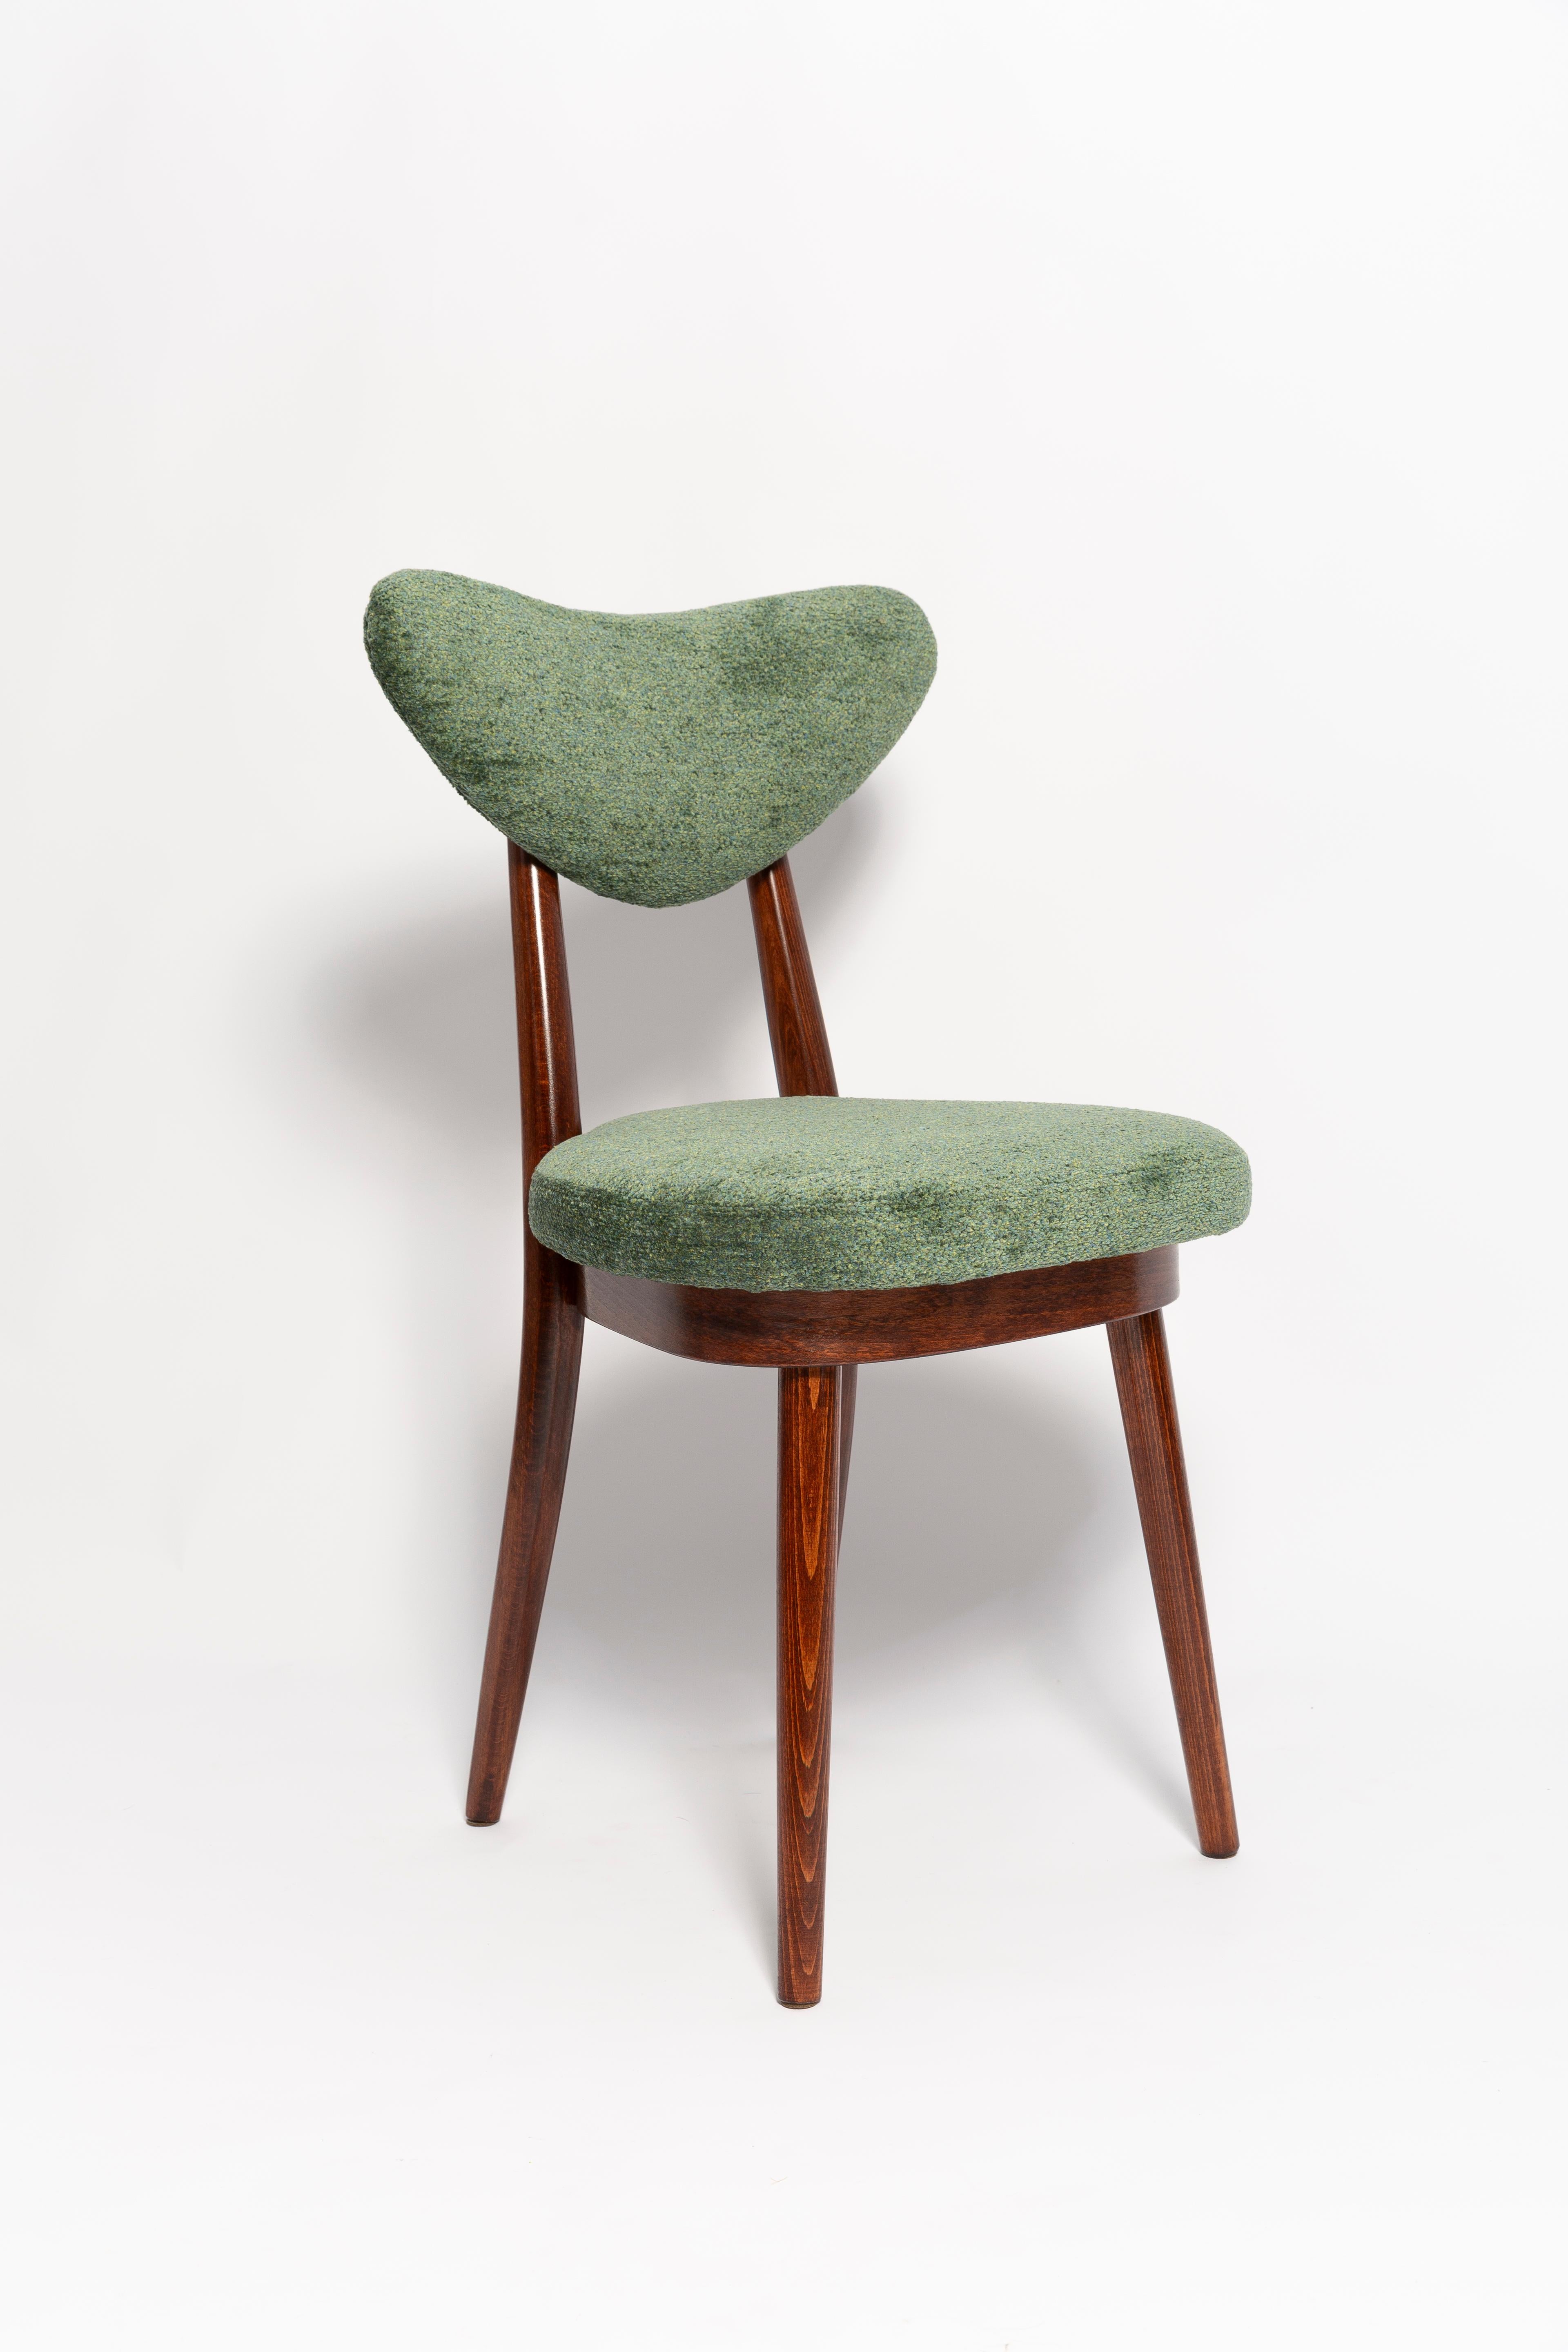 Fabric Mid Century Heart Chair and Stool, Green Velvet, Dark Wood, Europe 1960s For Sale